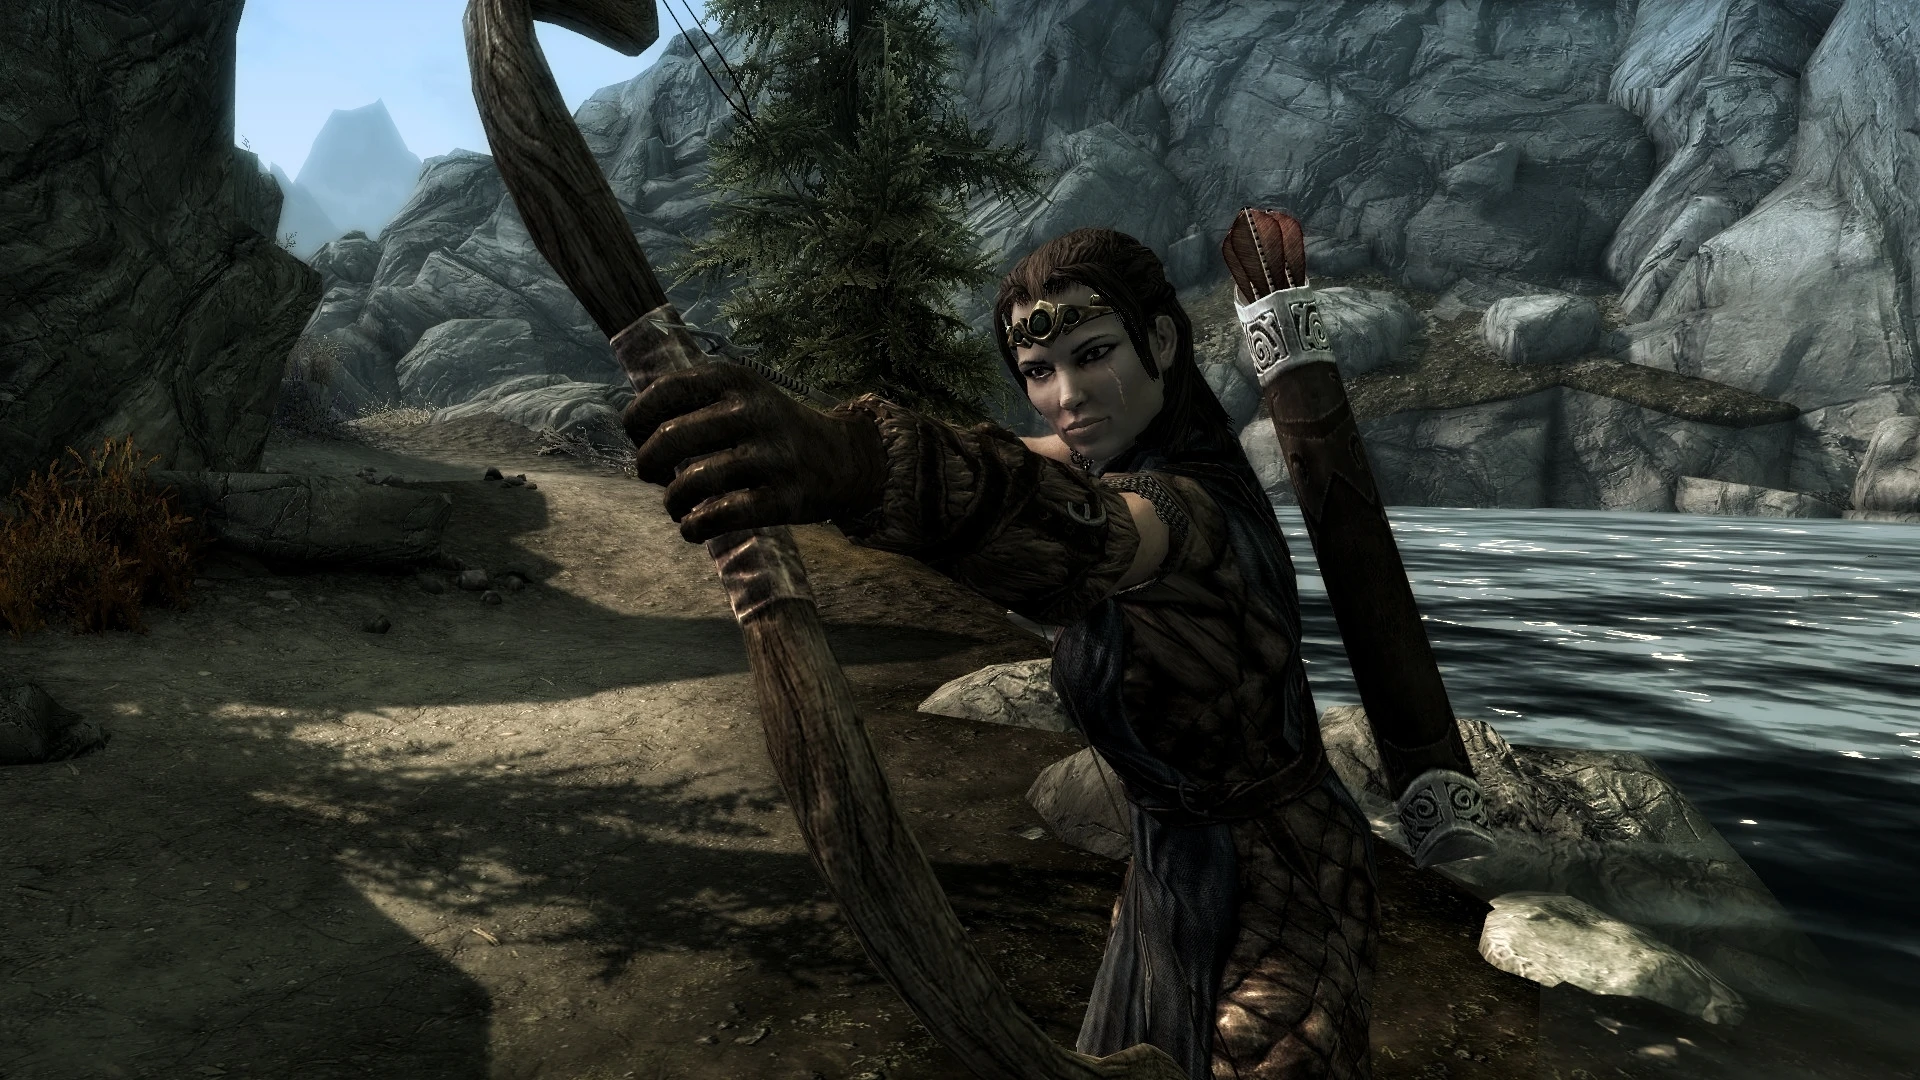 My First Skyrim Character.